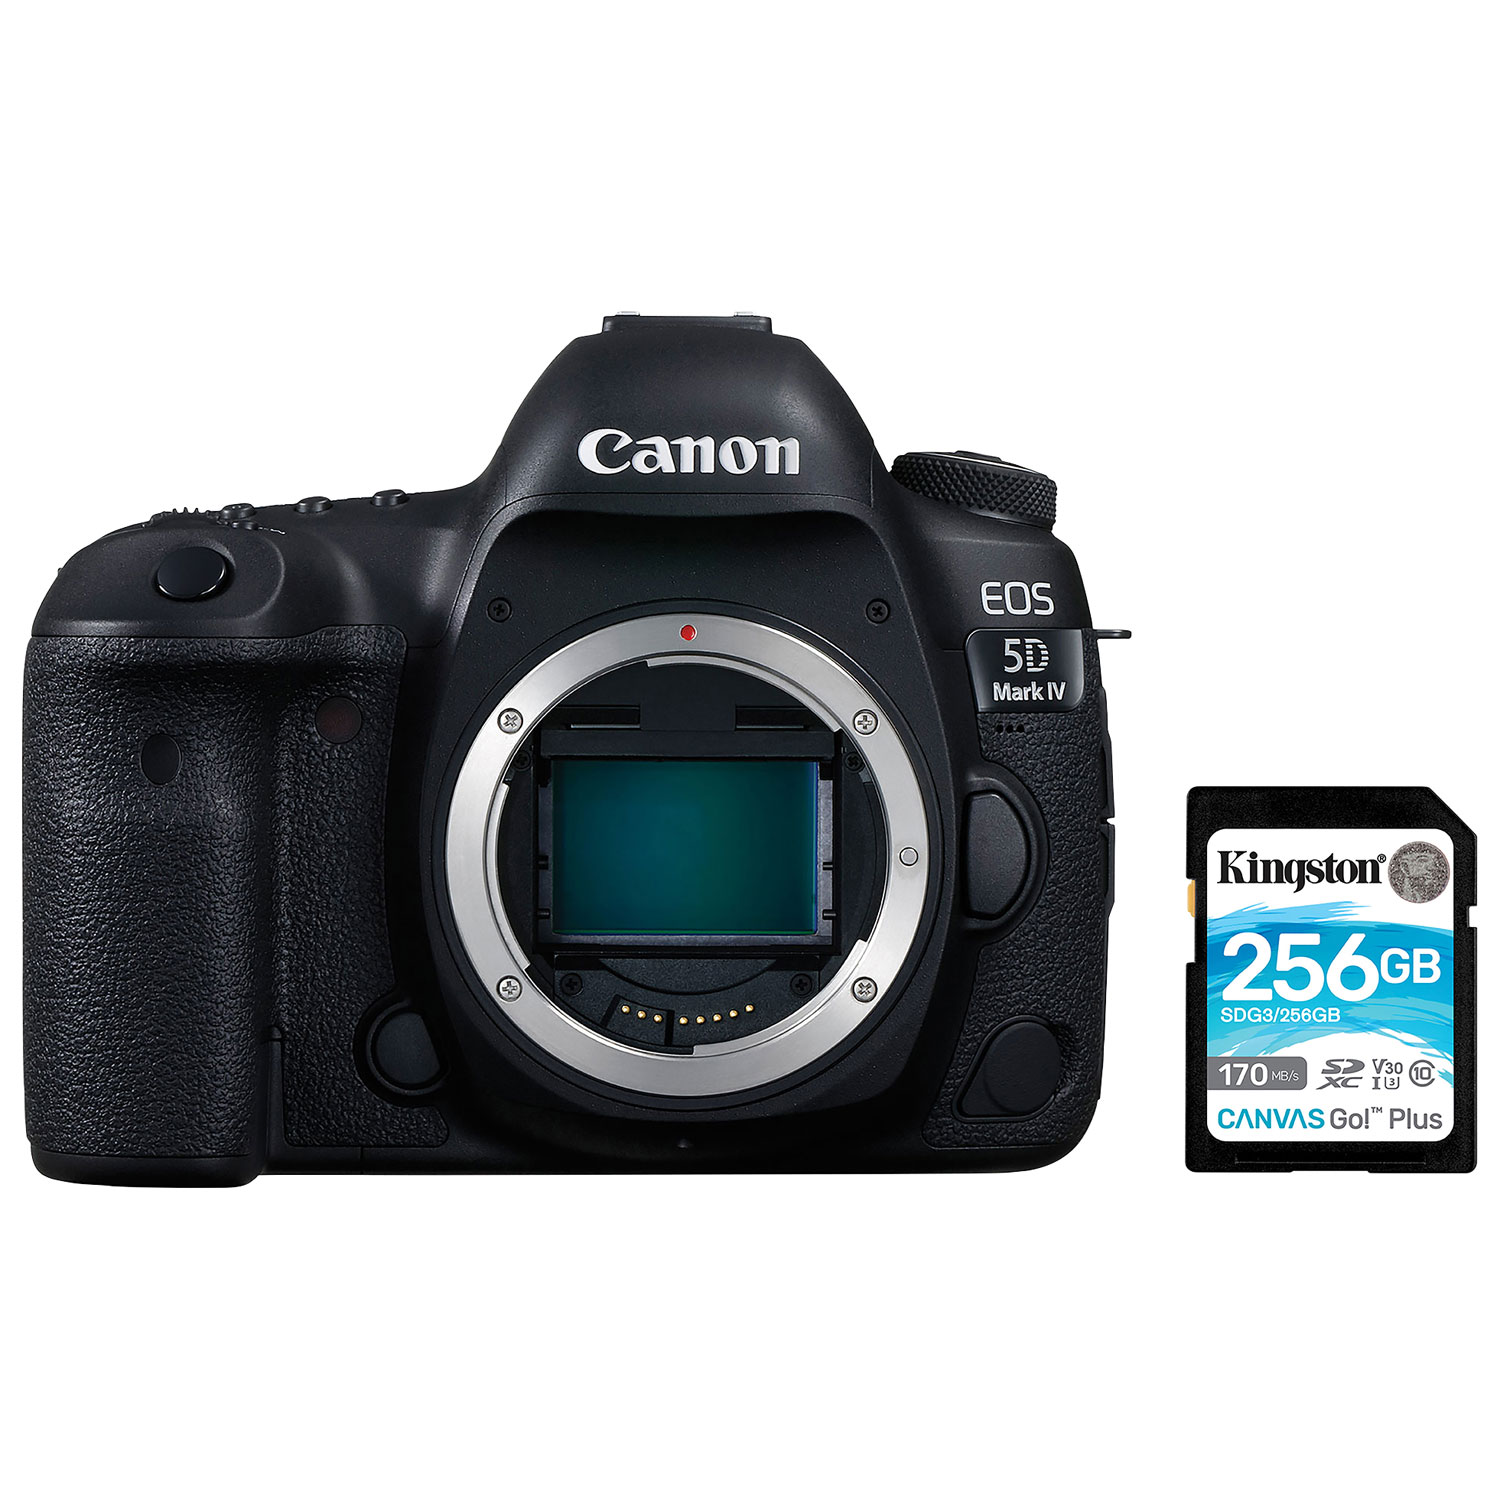 Canon EOS 5D Mark IV Full Frame DSLR Camera (Body Only) with 256GB Memory Card